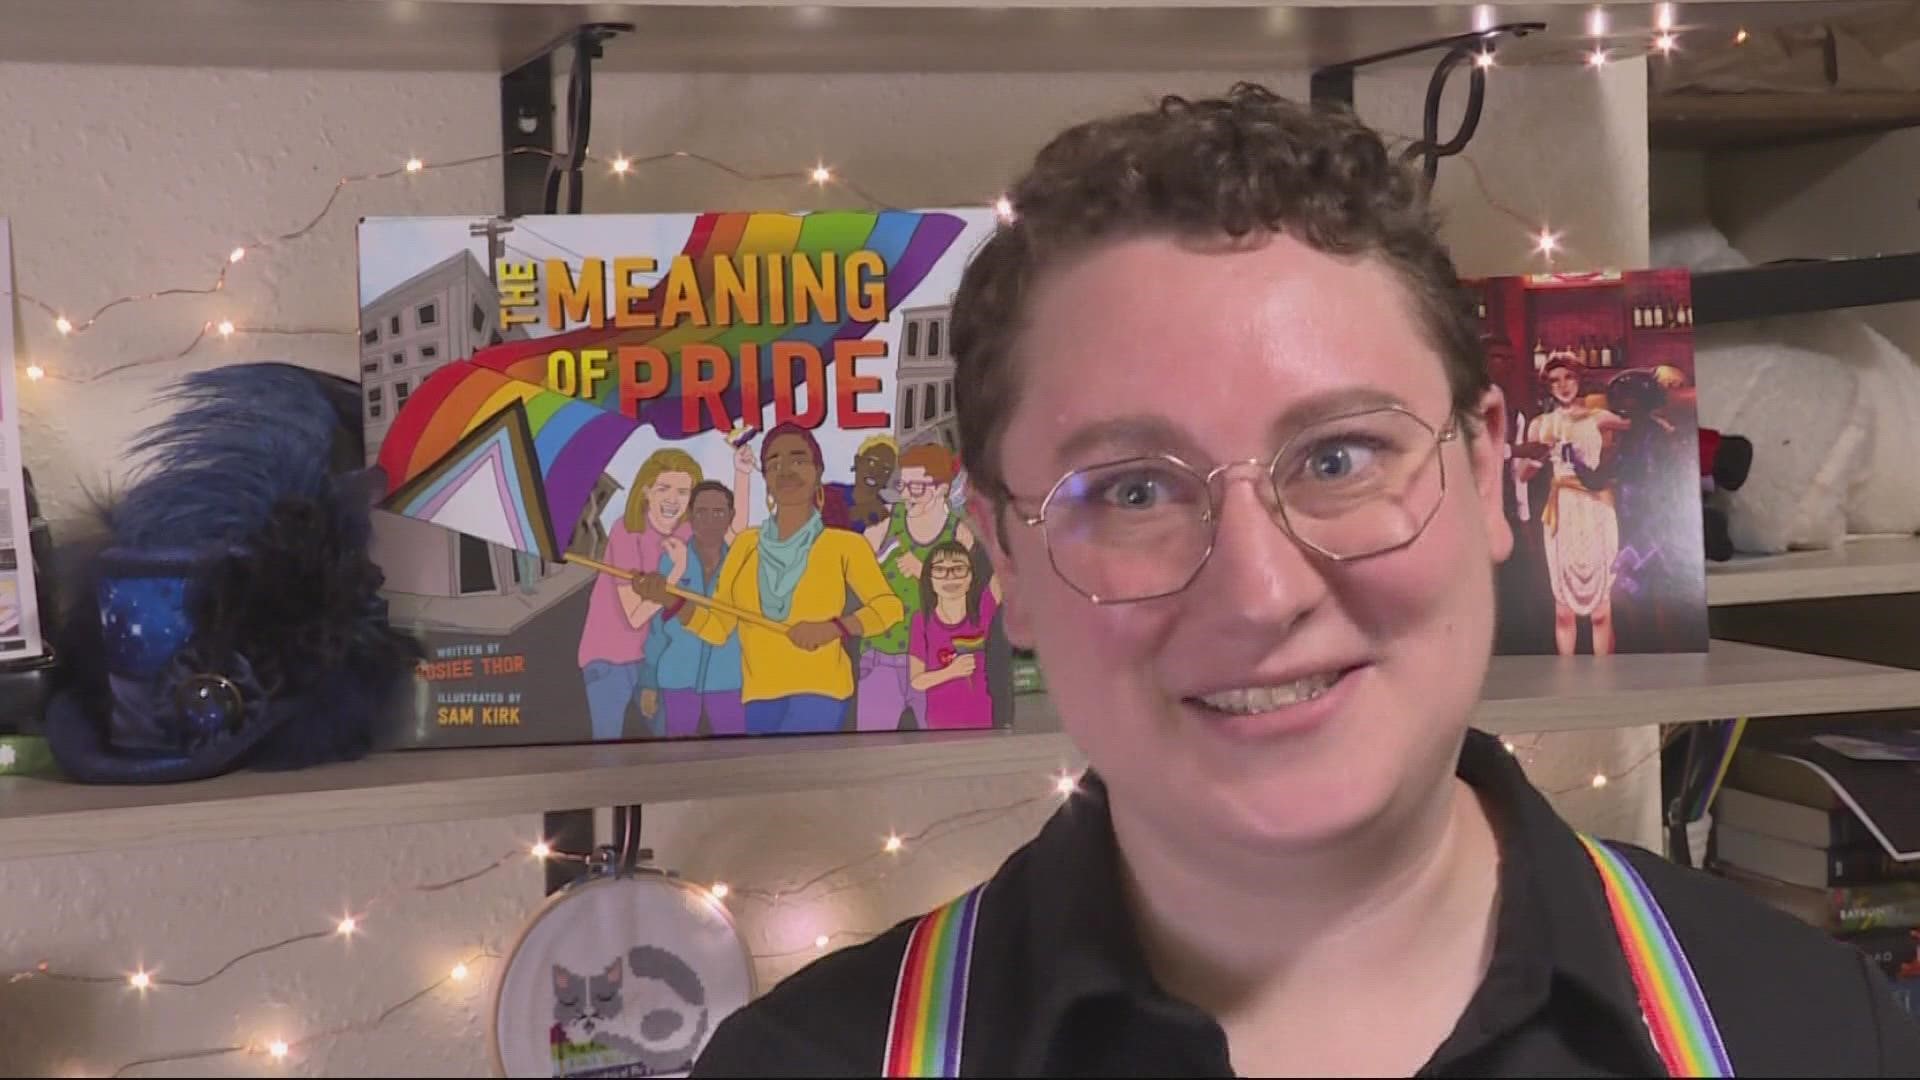 Oregon author Rosiee Thor has a new children's book on the meaning of LGBTQ pride. KGW spoke to her about her inspiration behind the book.